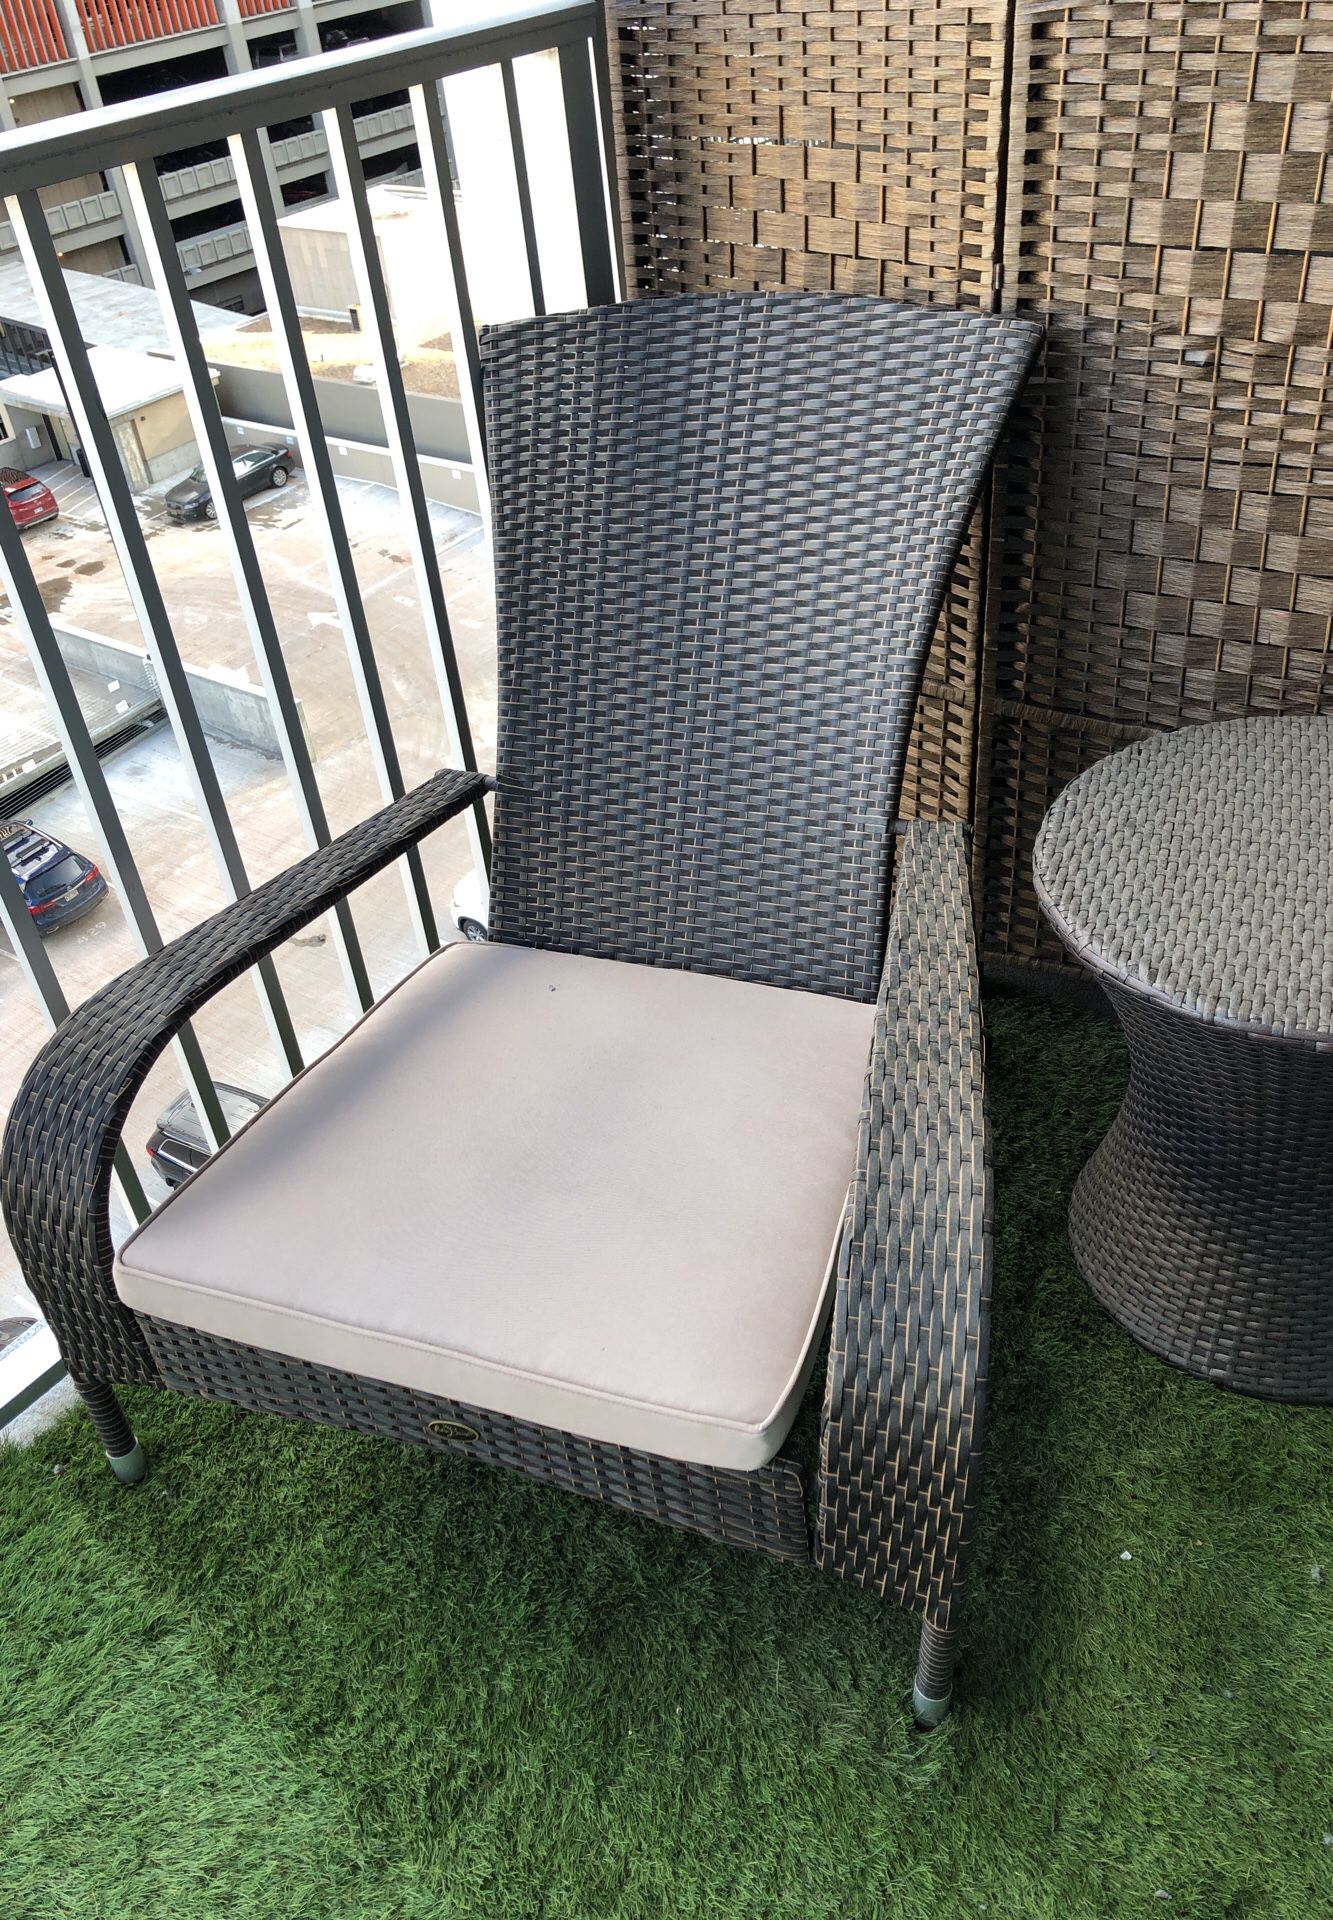 Outdoor Wicker Chair x2 and Wicker Table